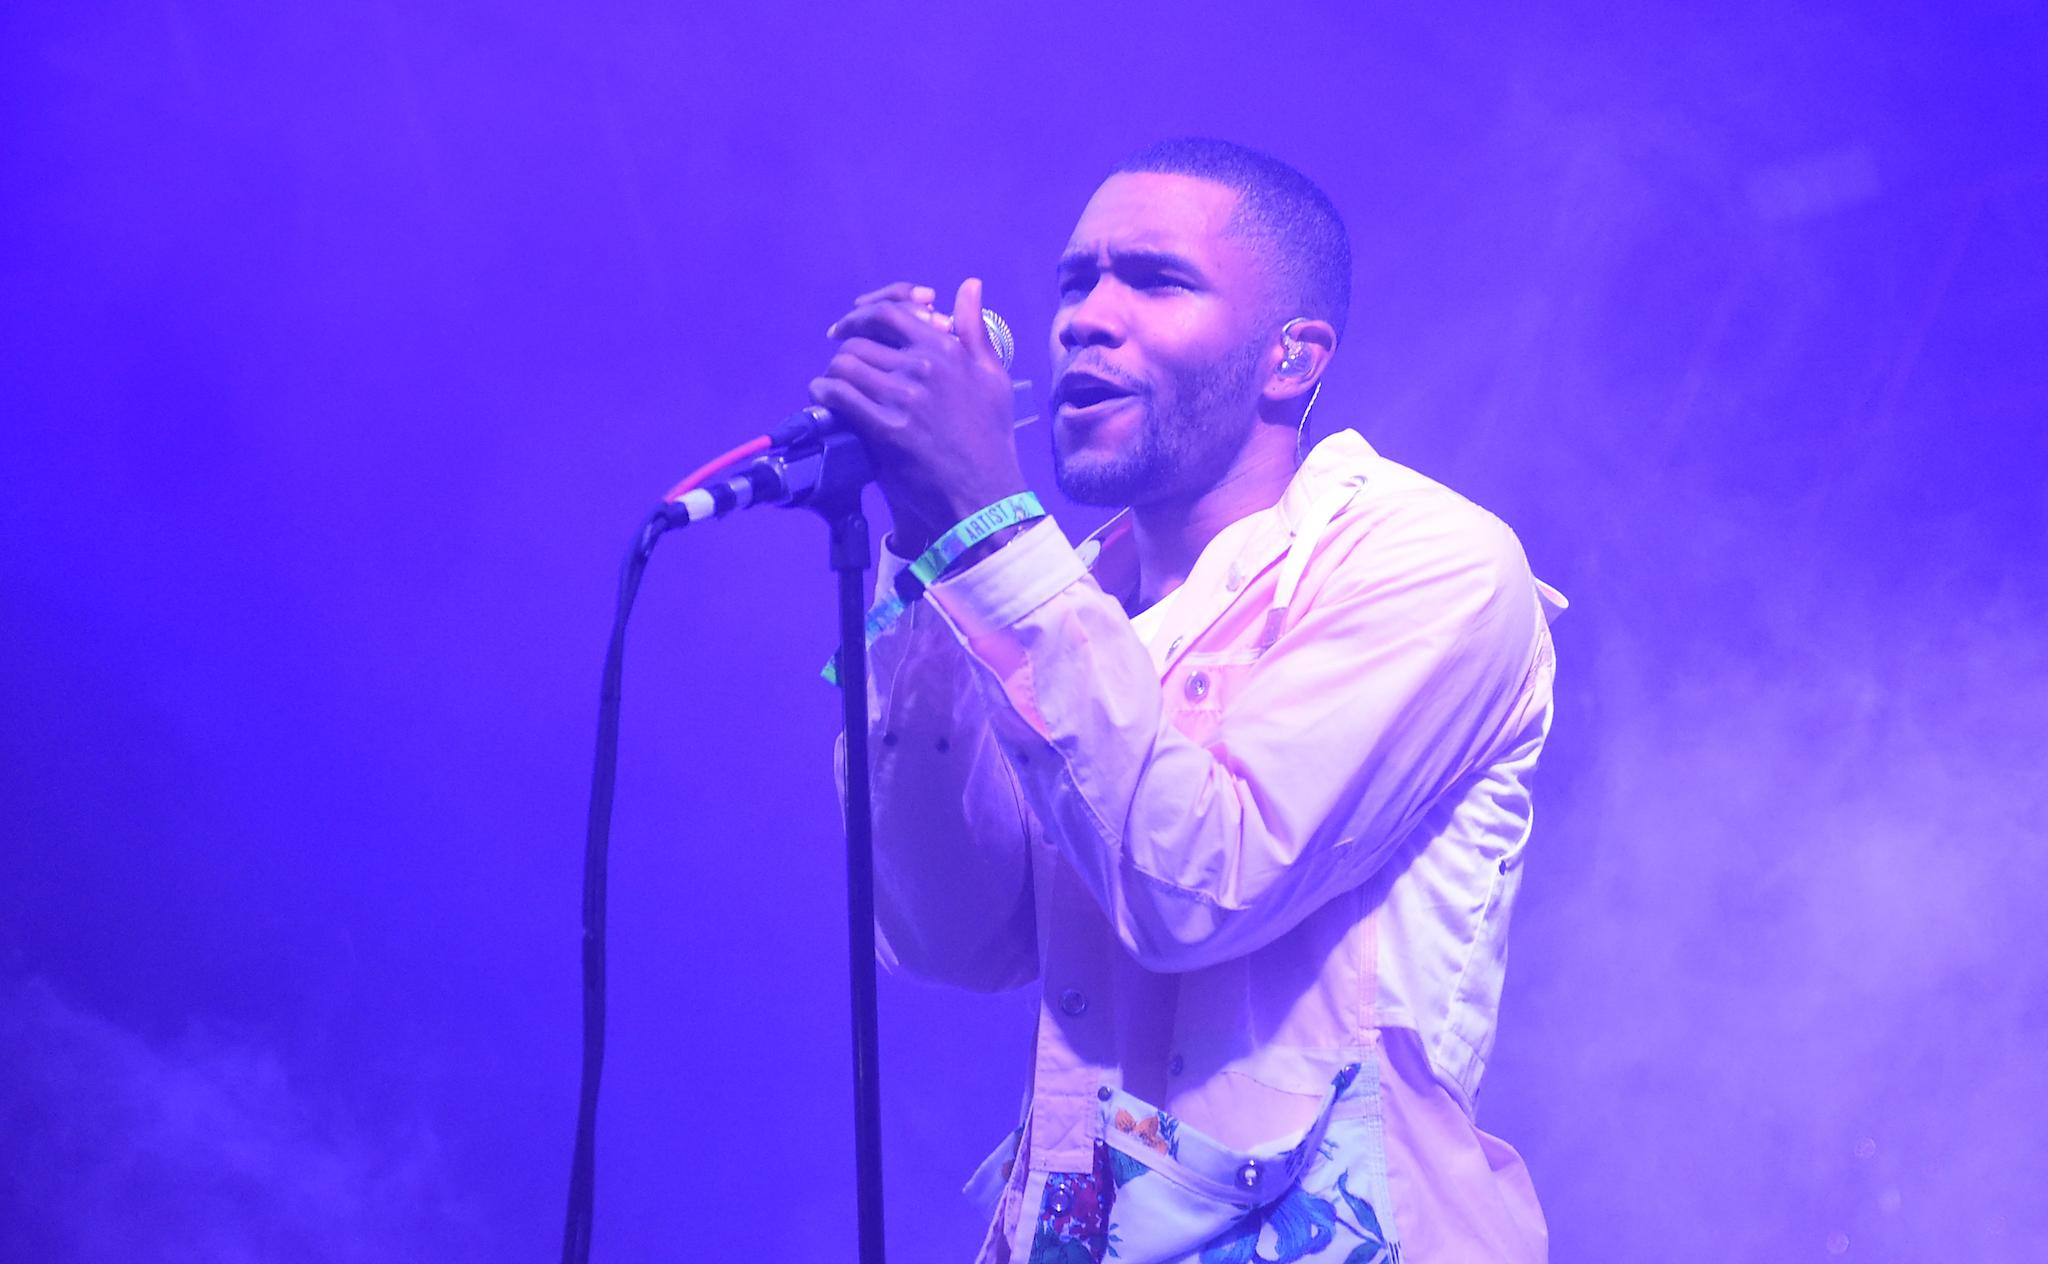 Frank Ocean performs during the 2014 Bonnaroo Music & Arts Festival on June 14, 2014 in Manchester, Tennessee